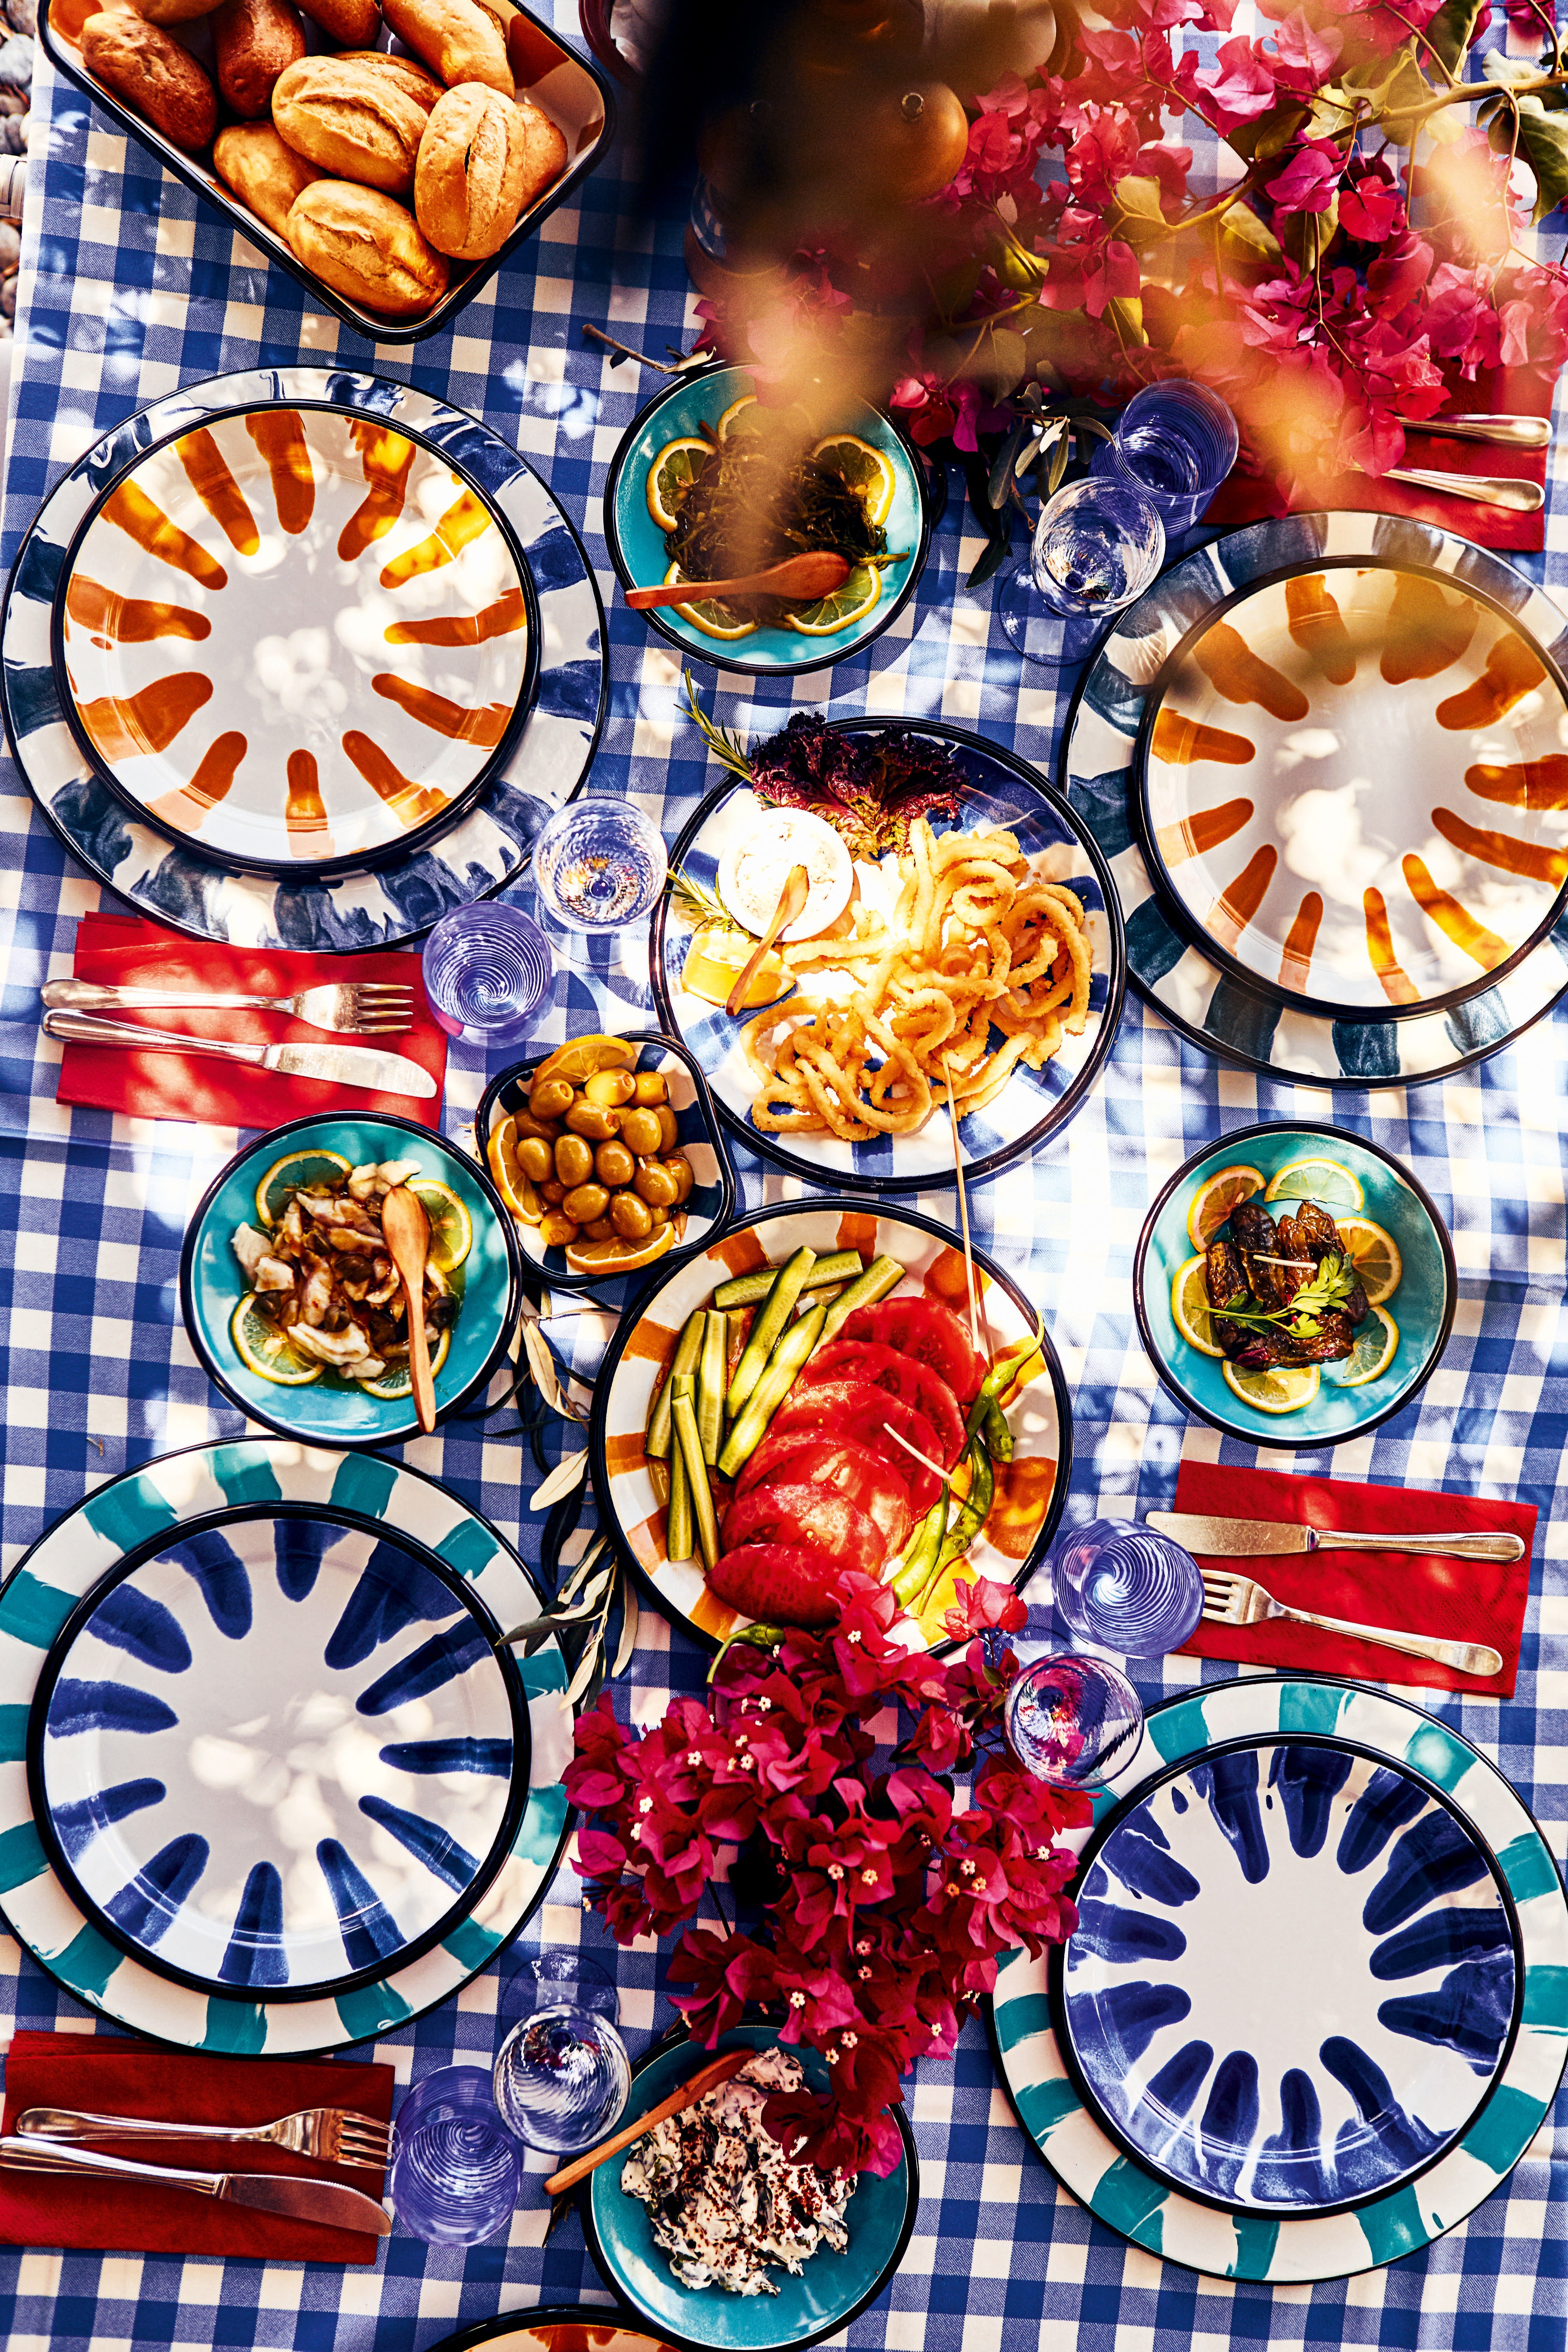 A vibrant spread of fresh olives, tomatoes, and mezes for the voyagers at the Bozburun Yacht Club